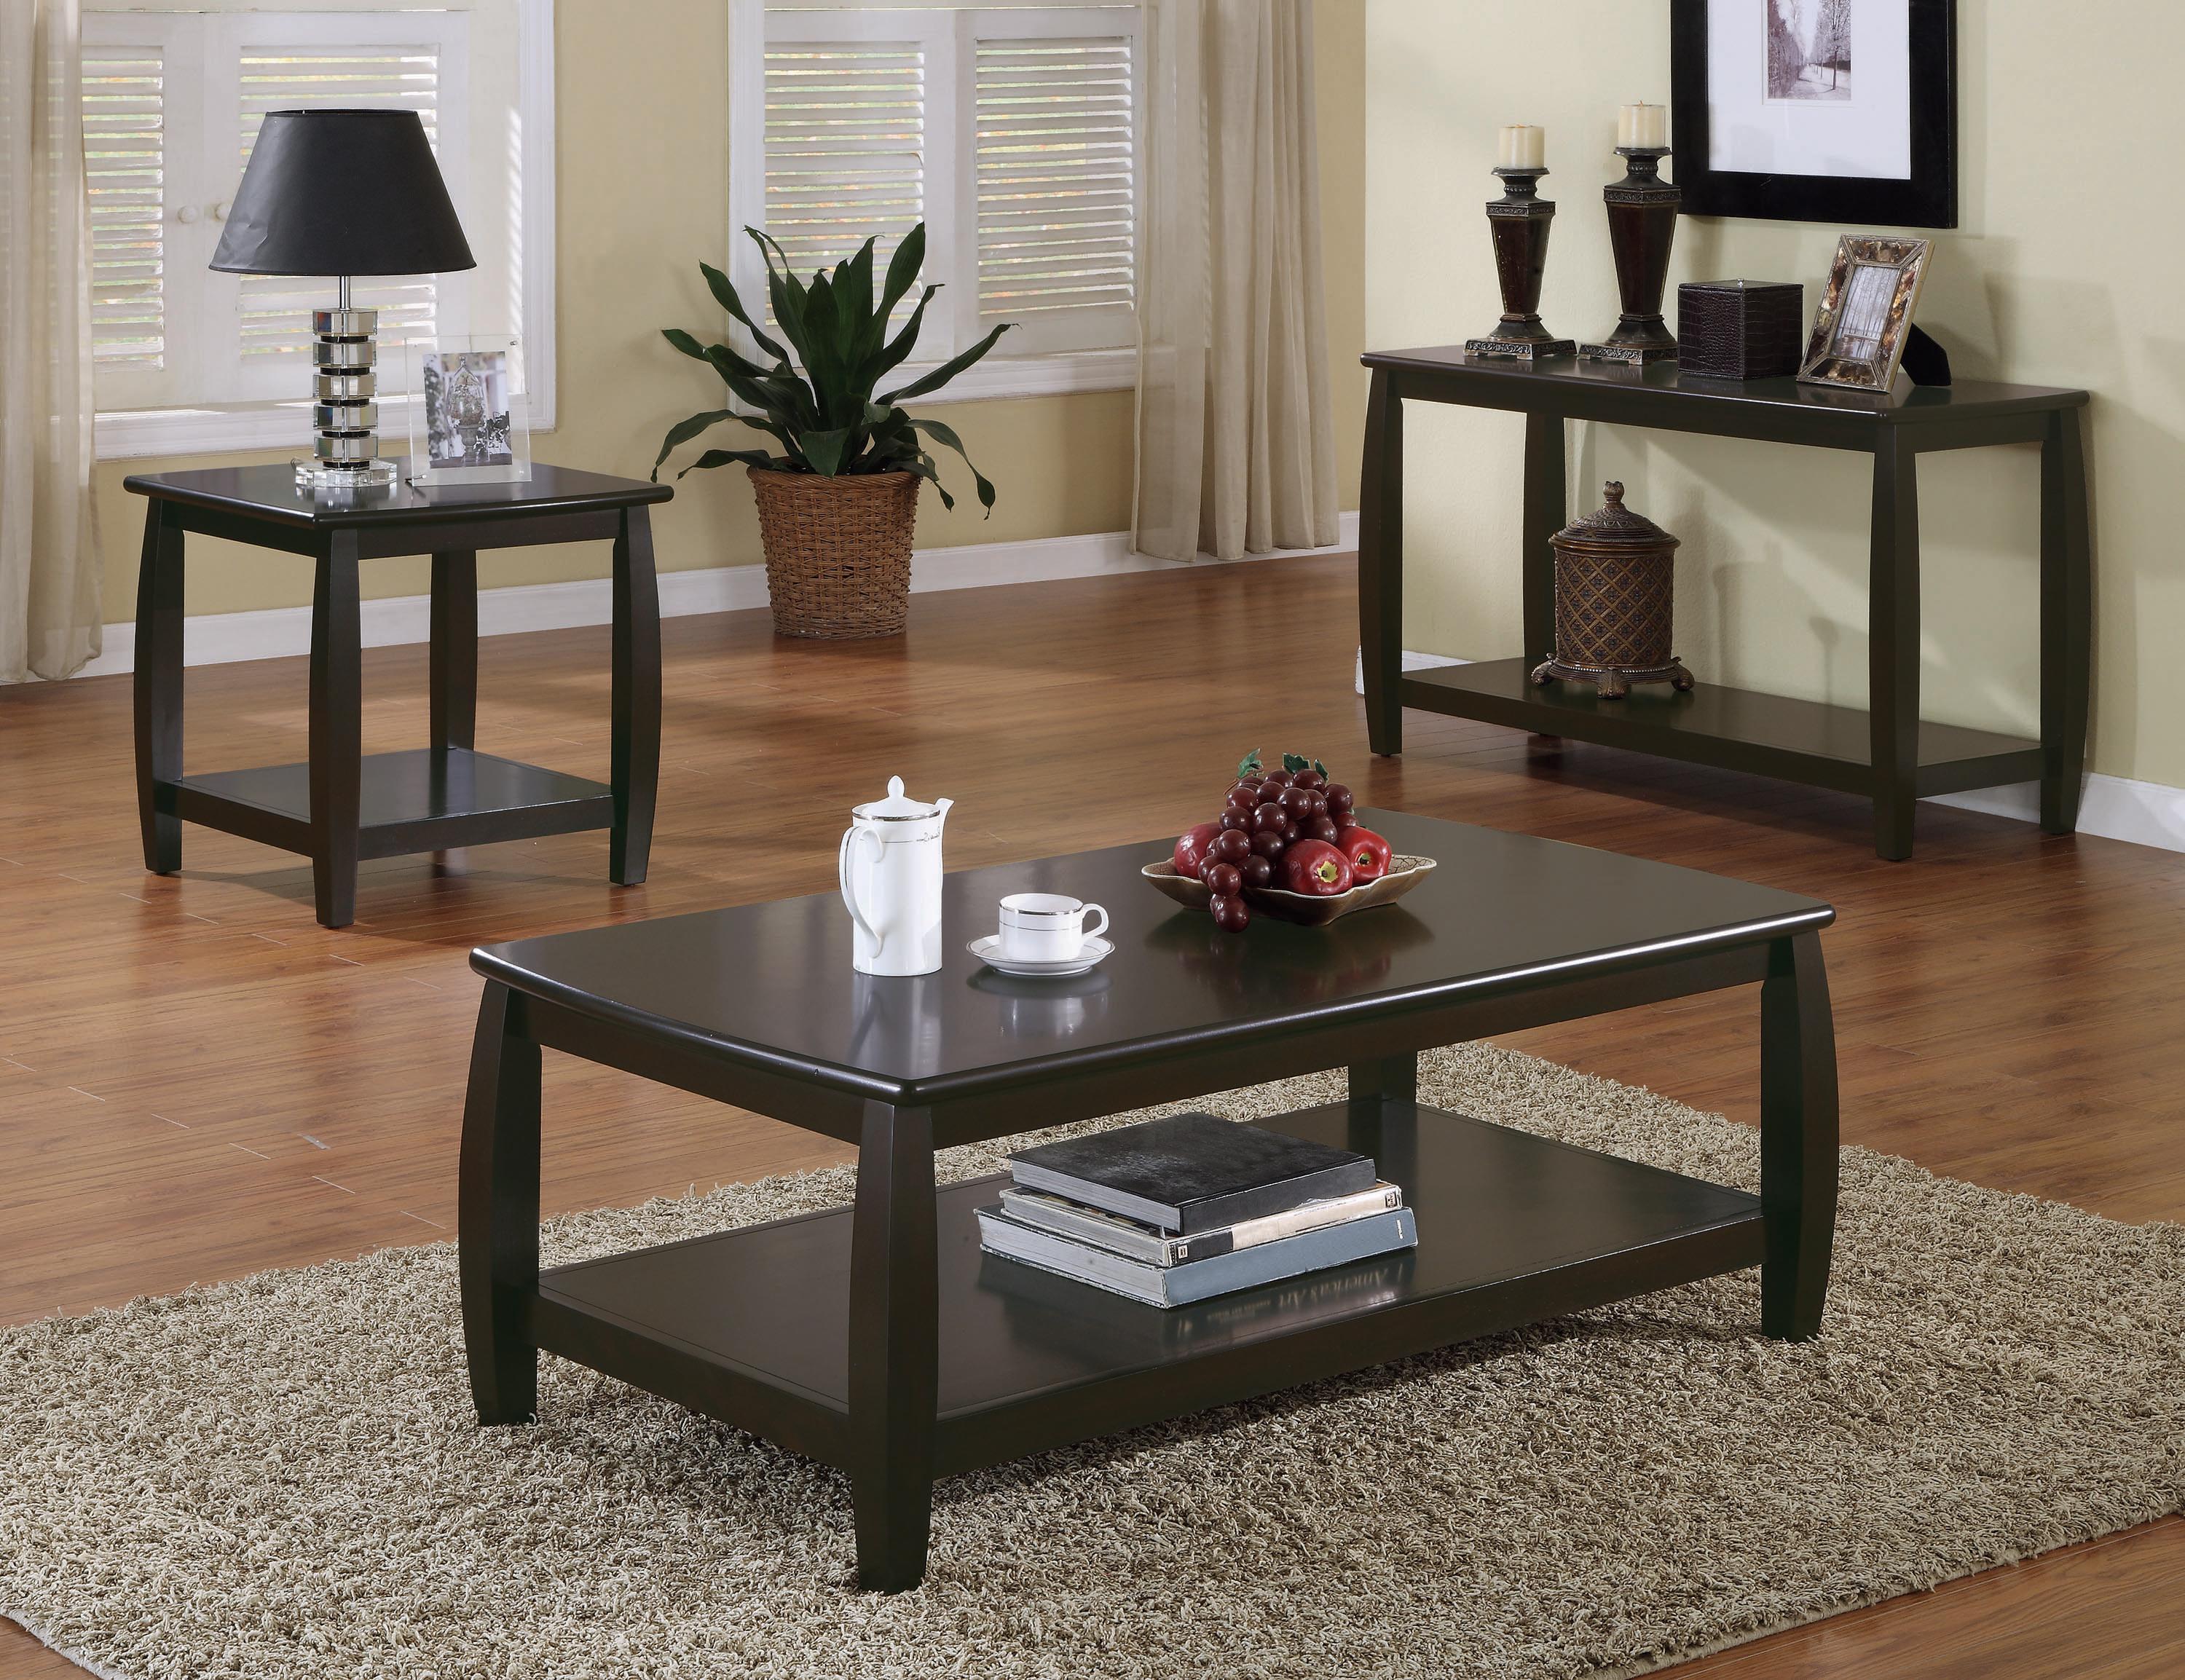 Transitional Coffee Table Set 701078-S3 701078-S3 in Espresso 